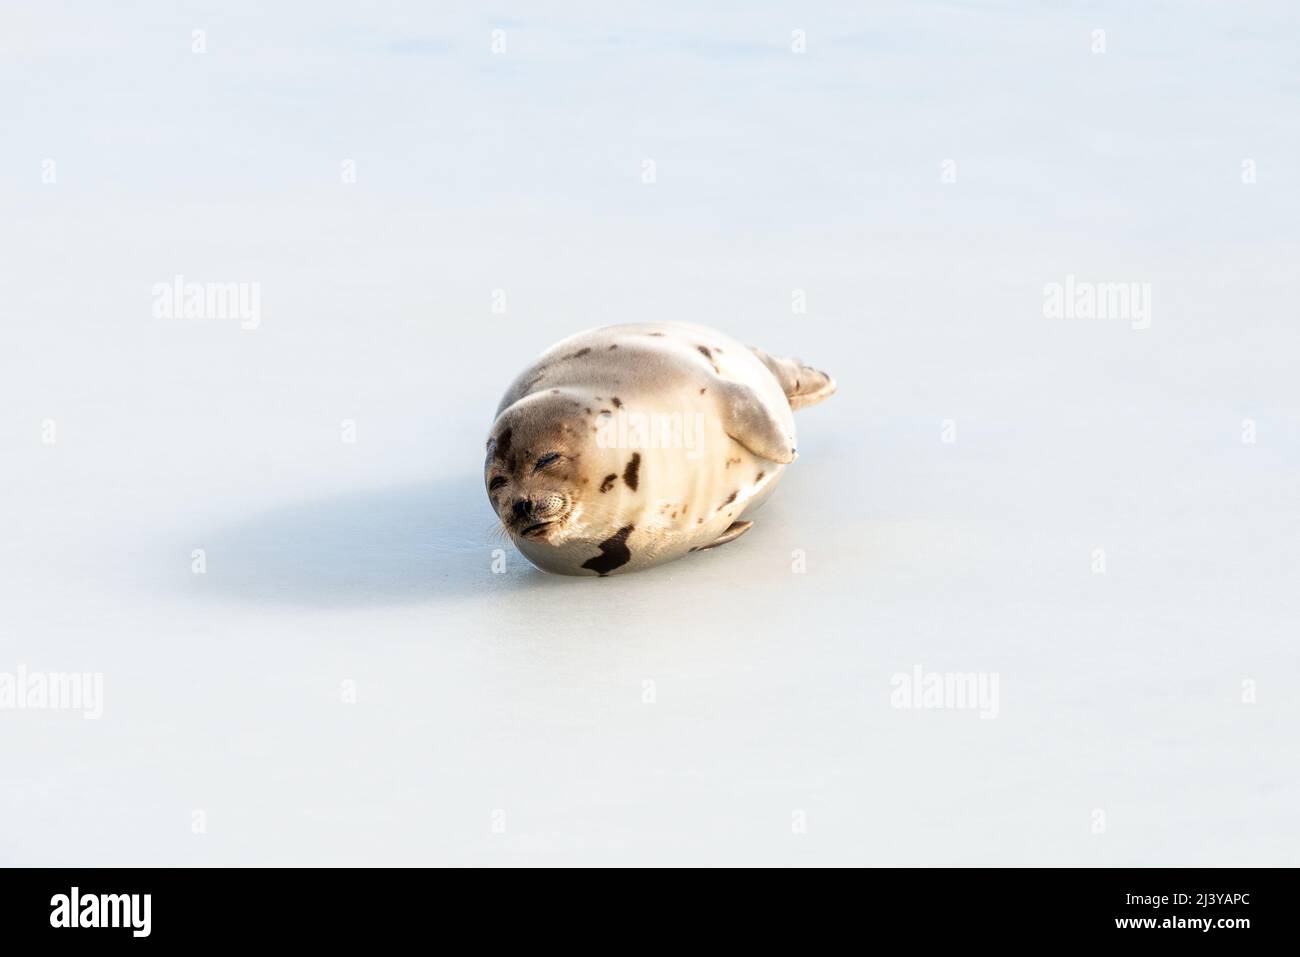 A large grey harp seal or harbor seal on white snow and tall yellow grass steering forward with a sad face. The wild gray seal has long whiskers. Stock Photo